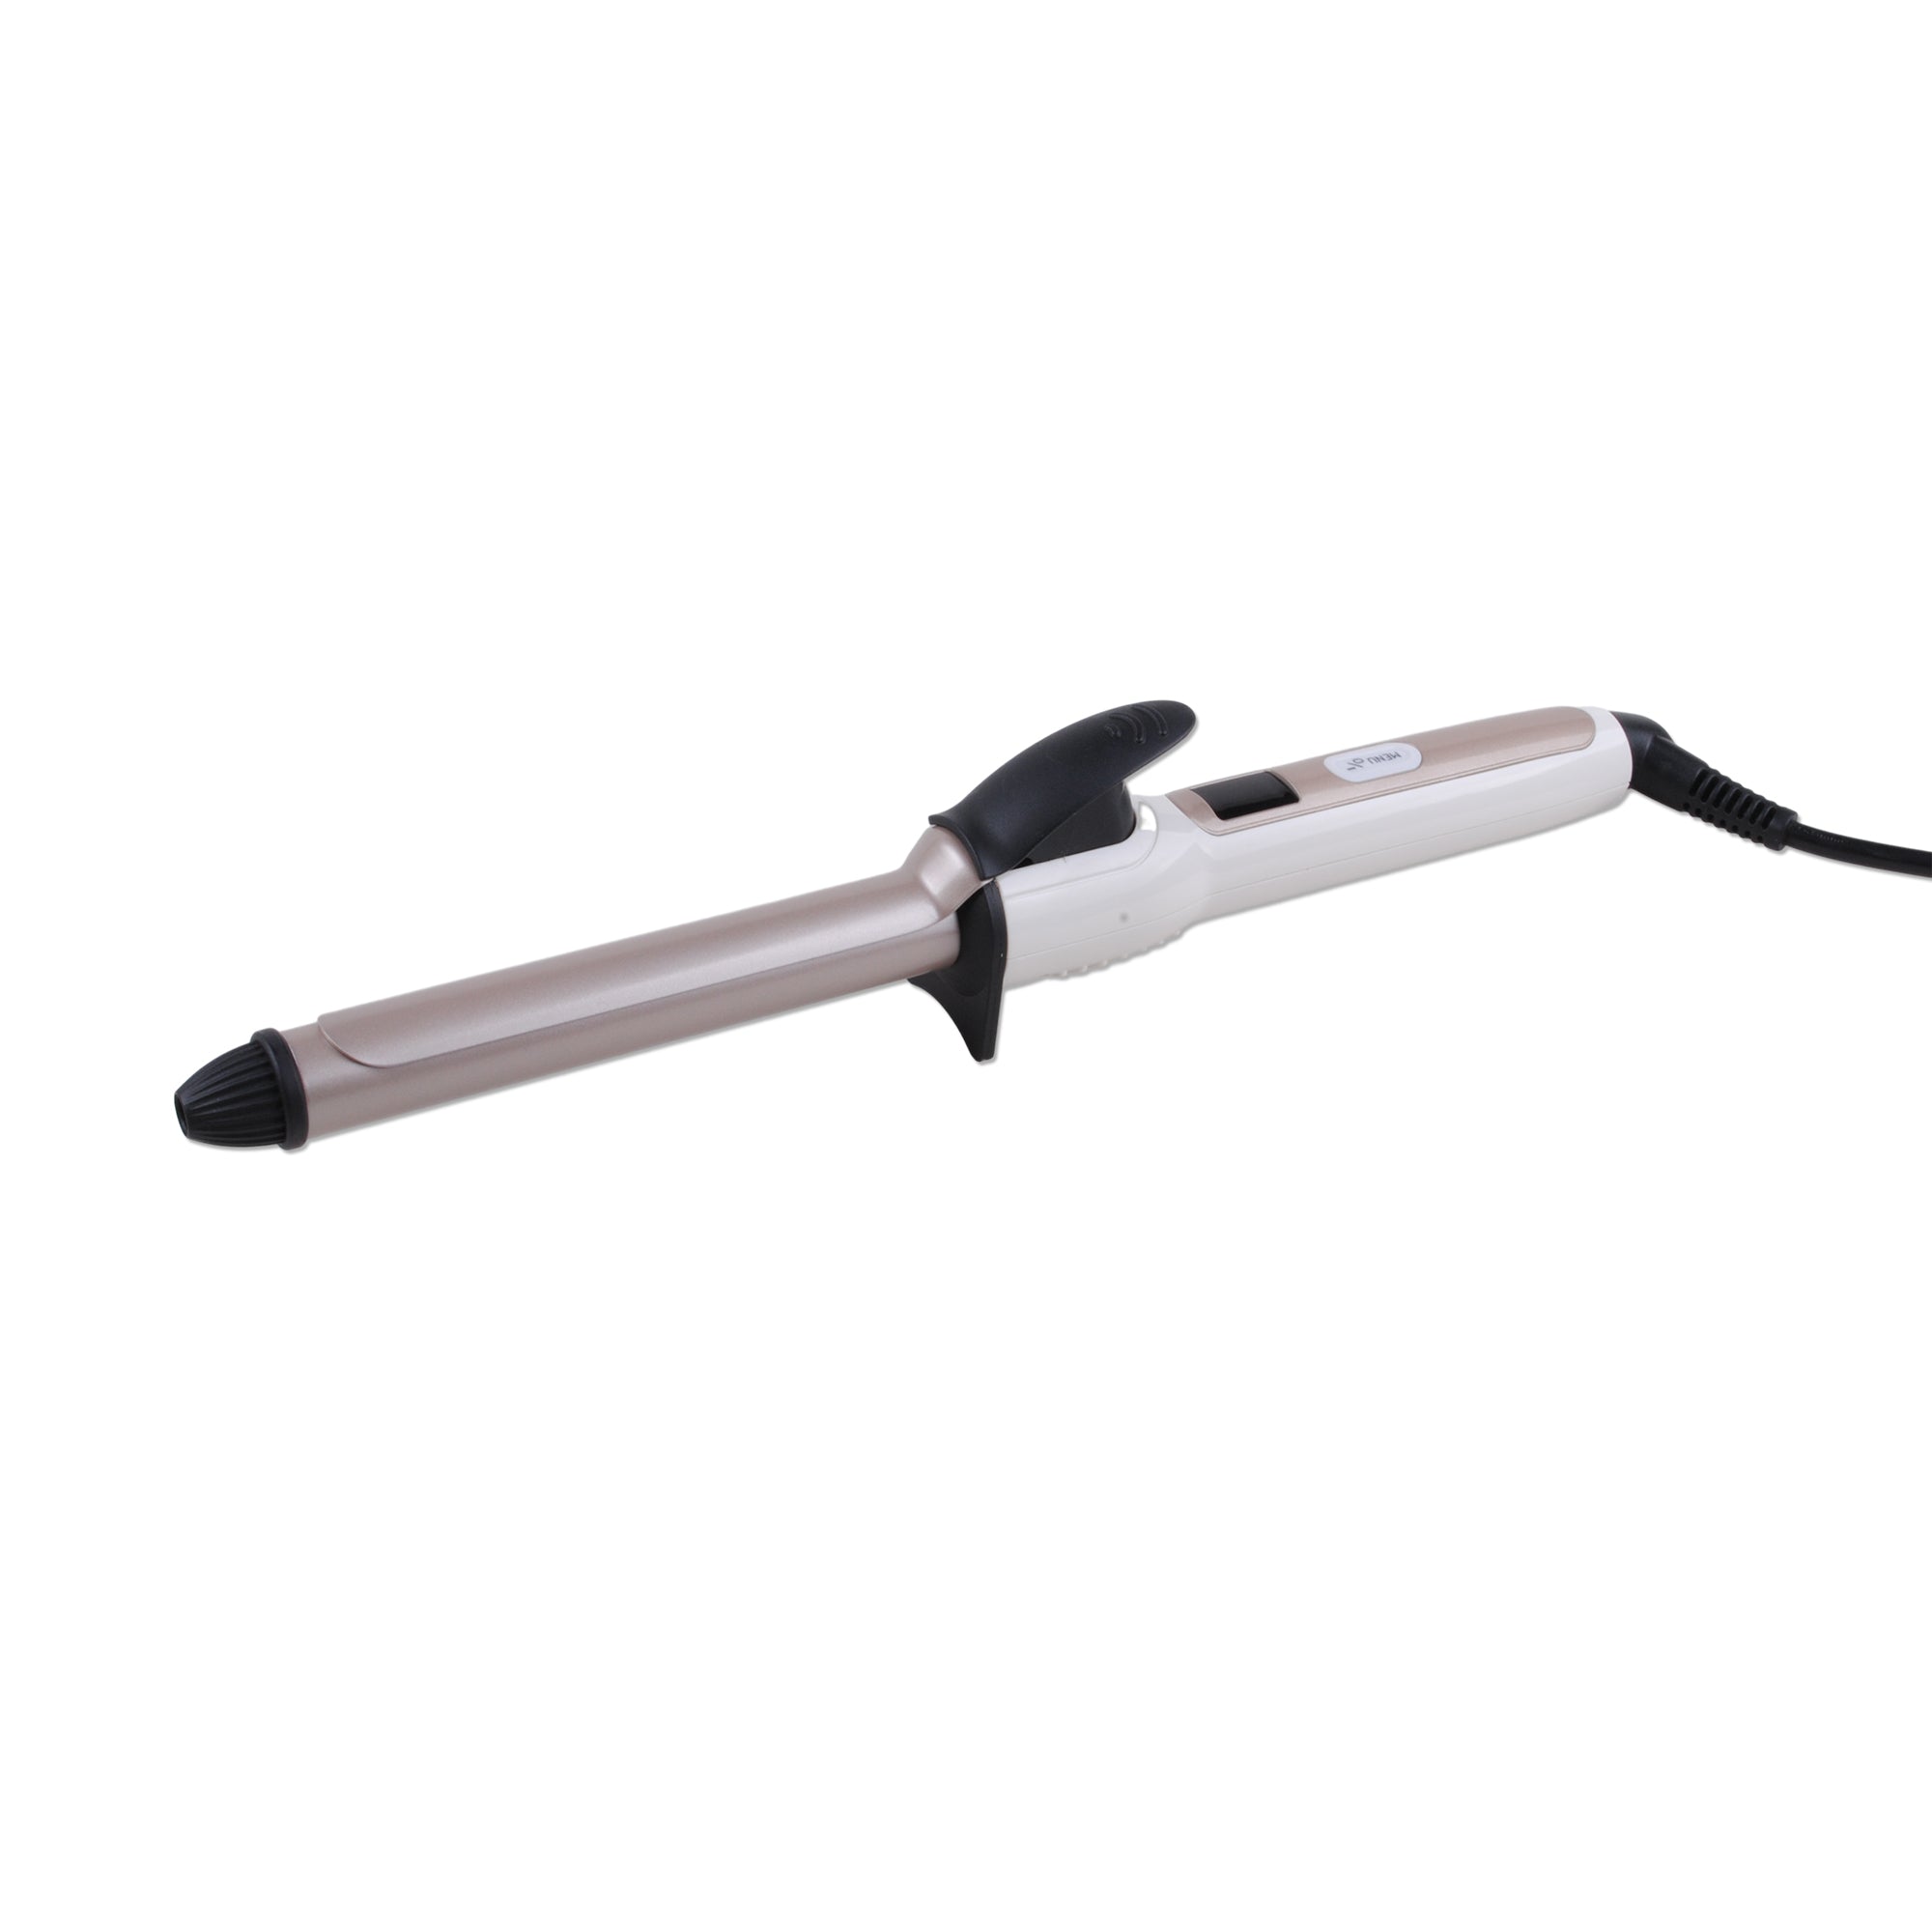 Electrical Curler TB-1084